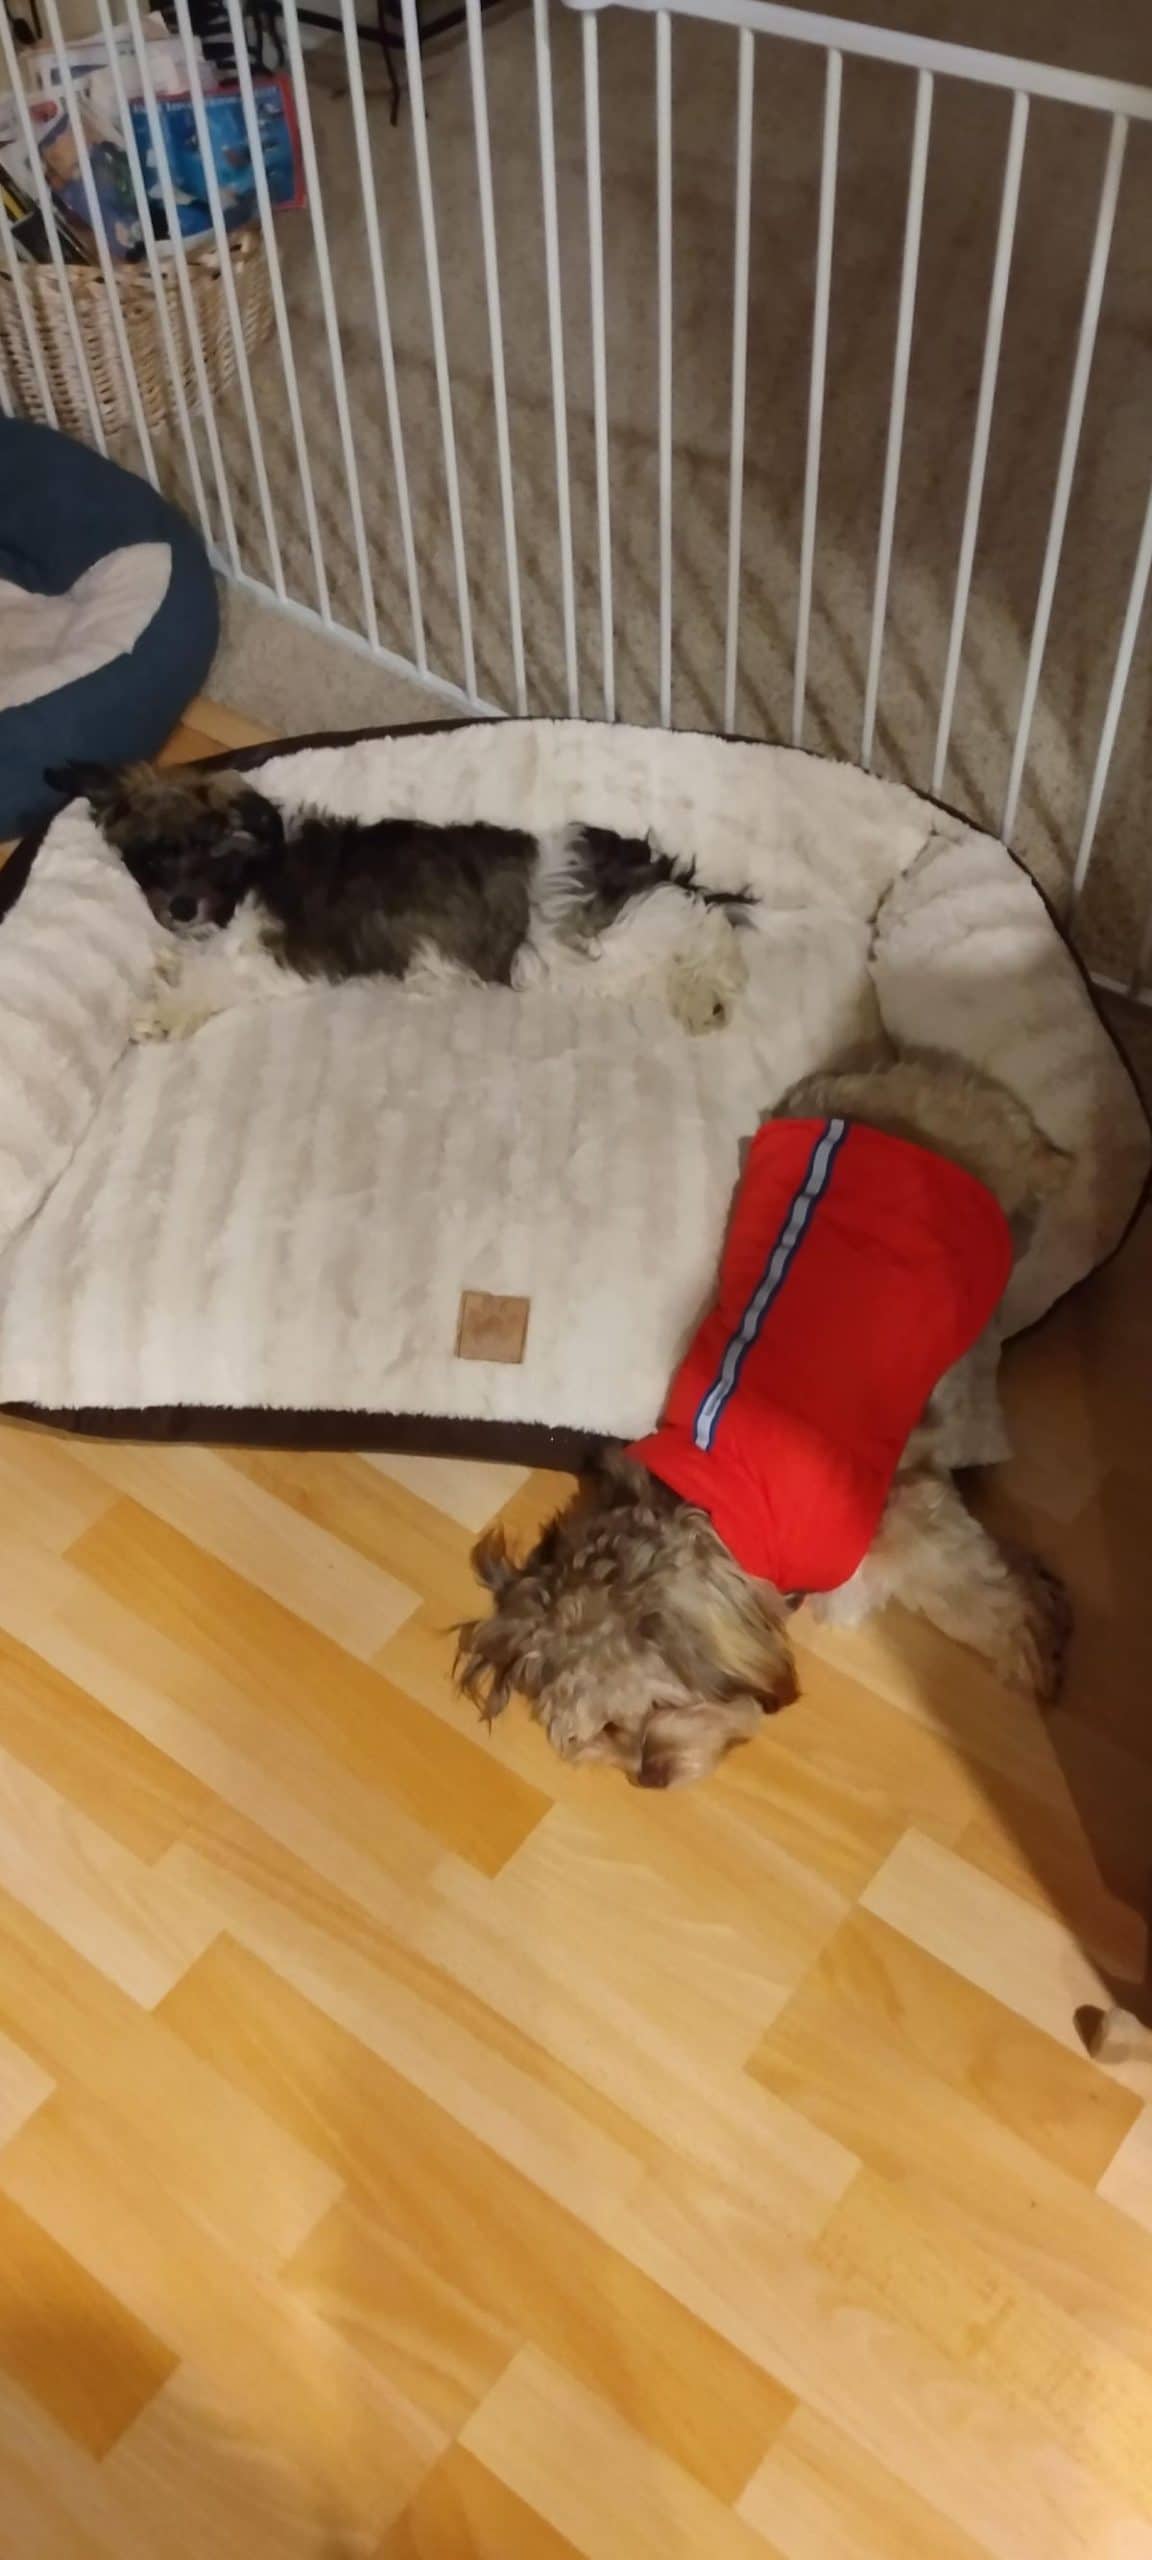 black and white dog sleeping on a white dog bed and a brown dog wearing a red shirt sleeping on the cat bed with the head and the front legs on the floor